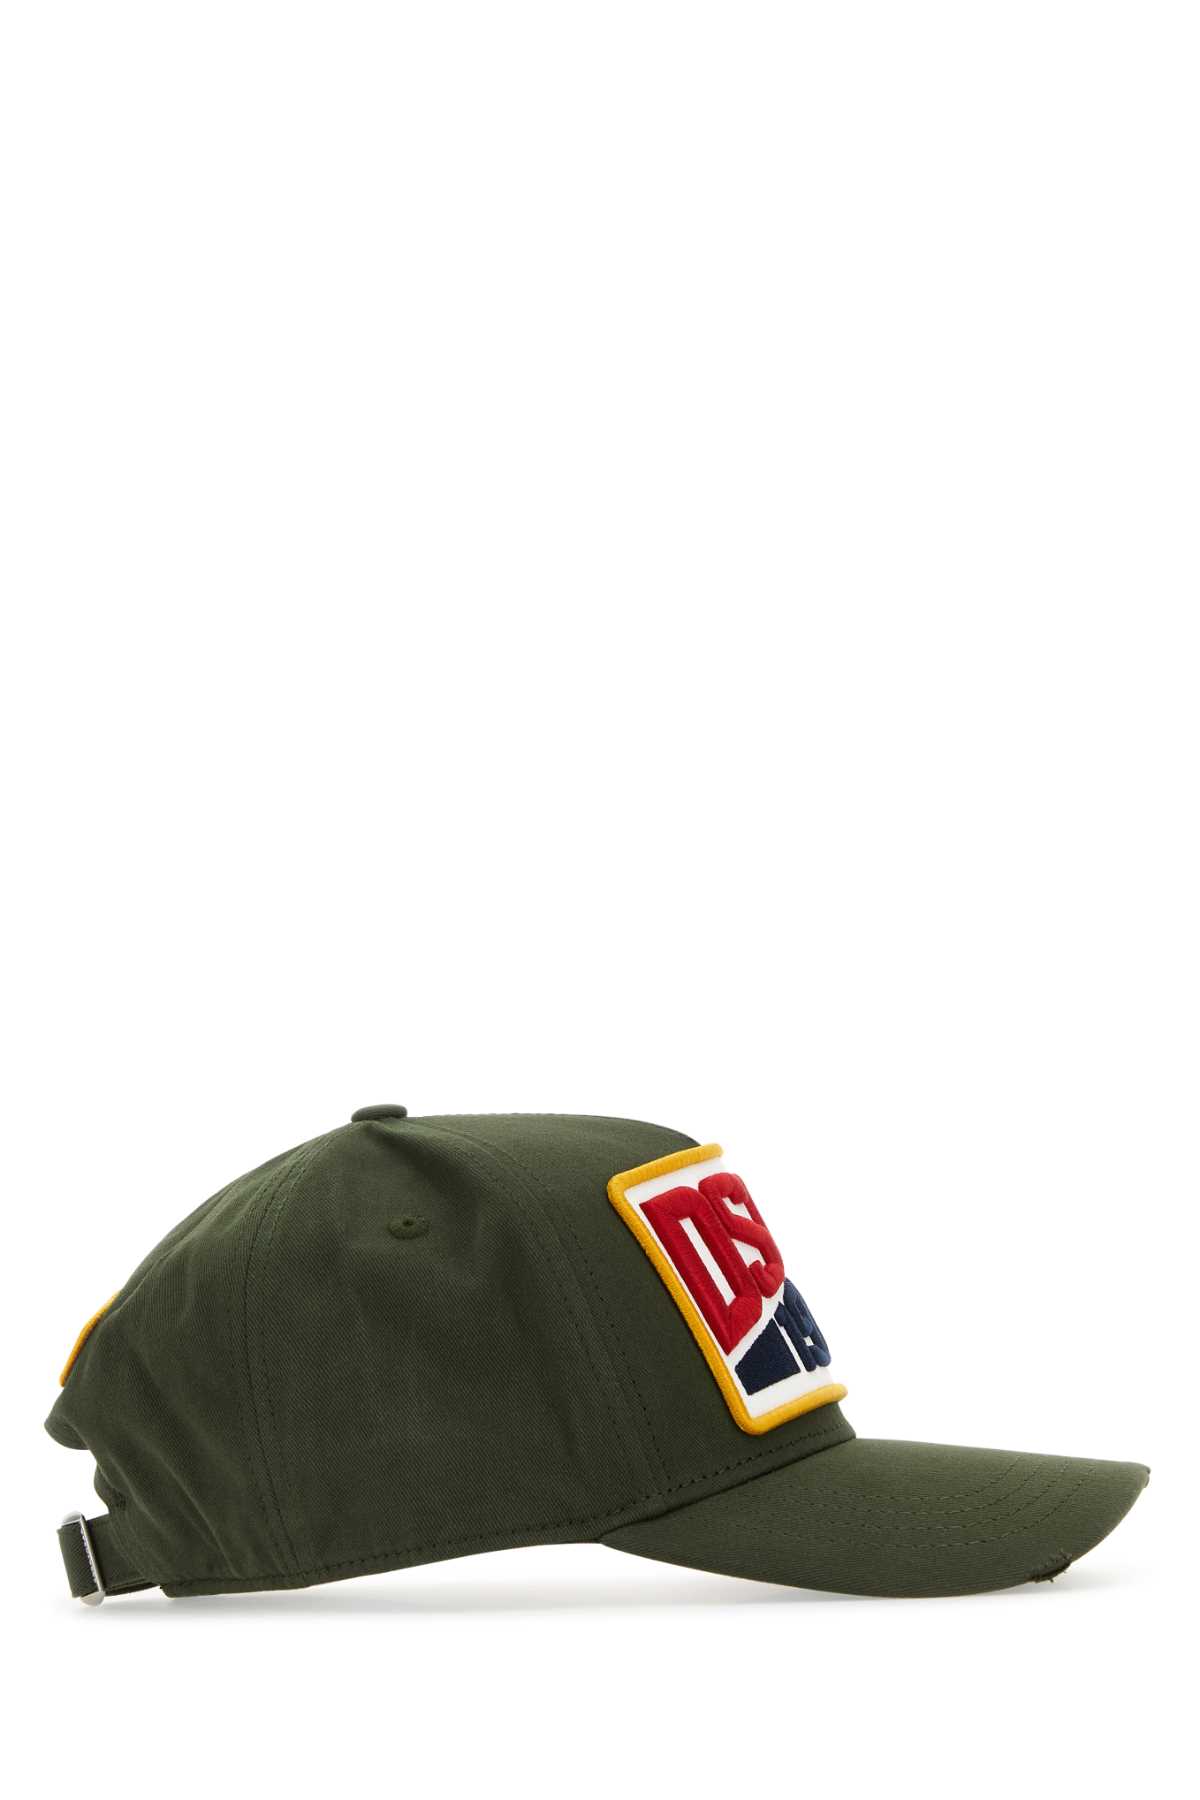 Dsquared2 Army Green Cotton Baseball Cap In Military